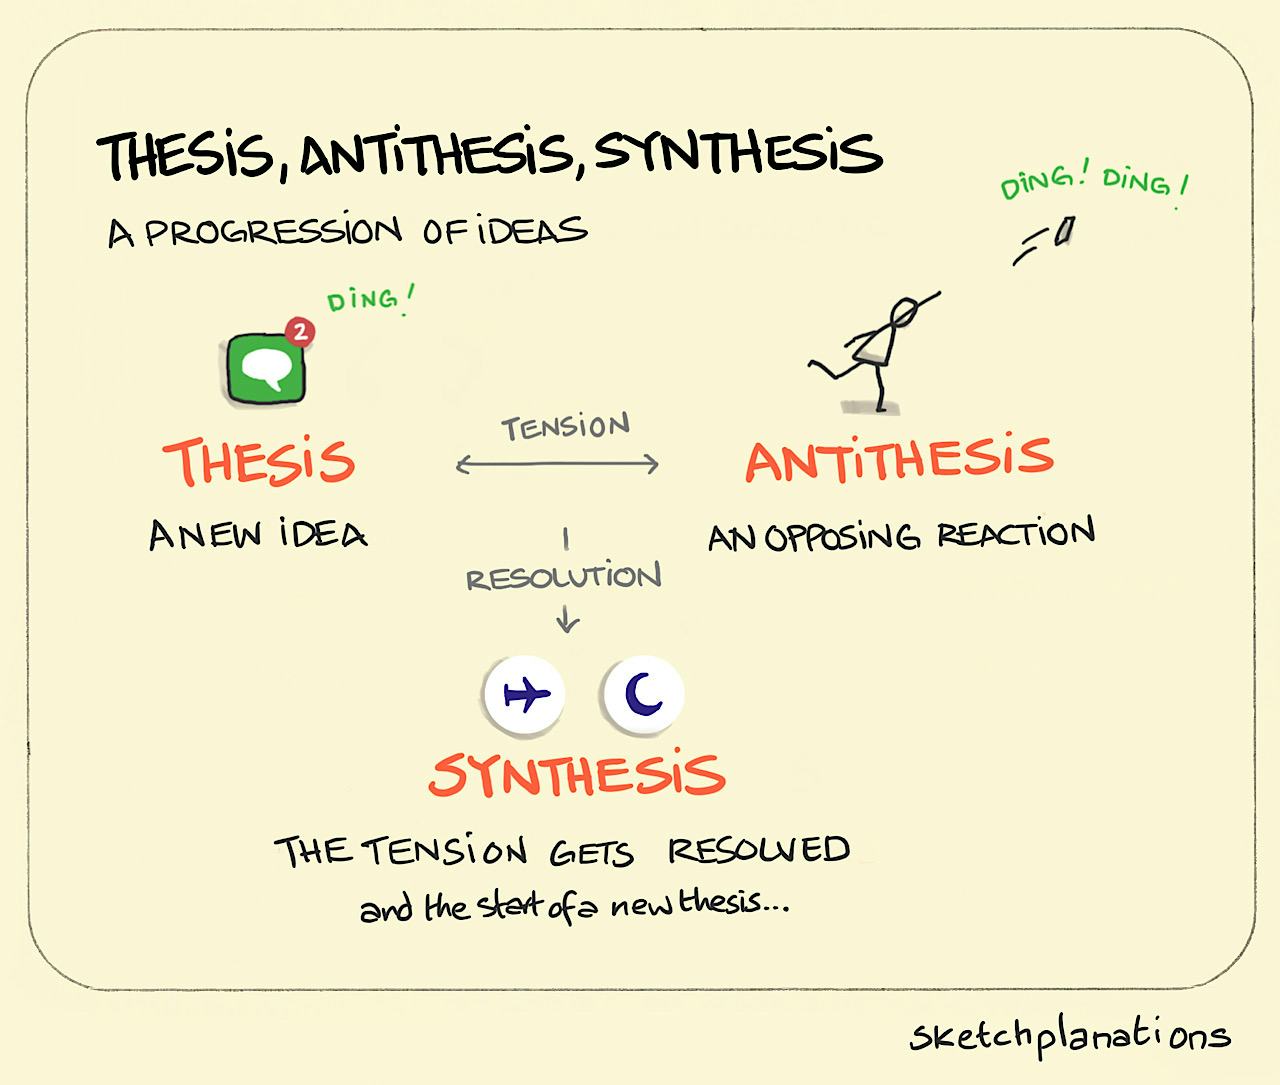 thesis antithesis synthesis dialectic process